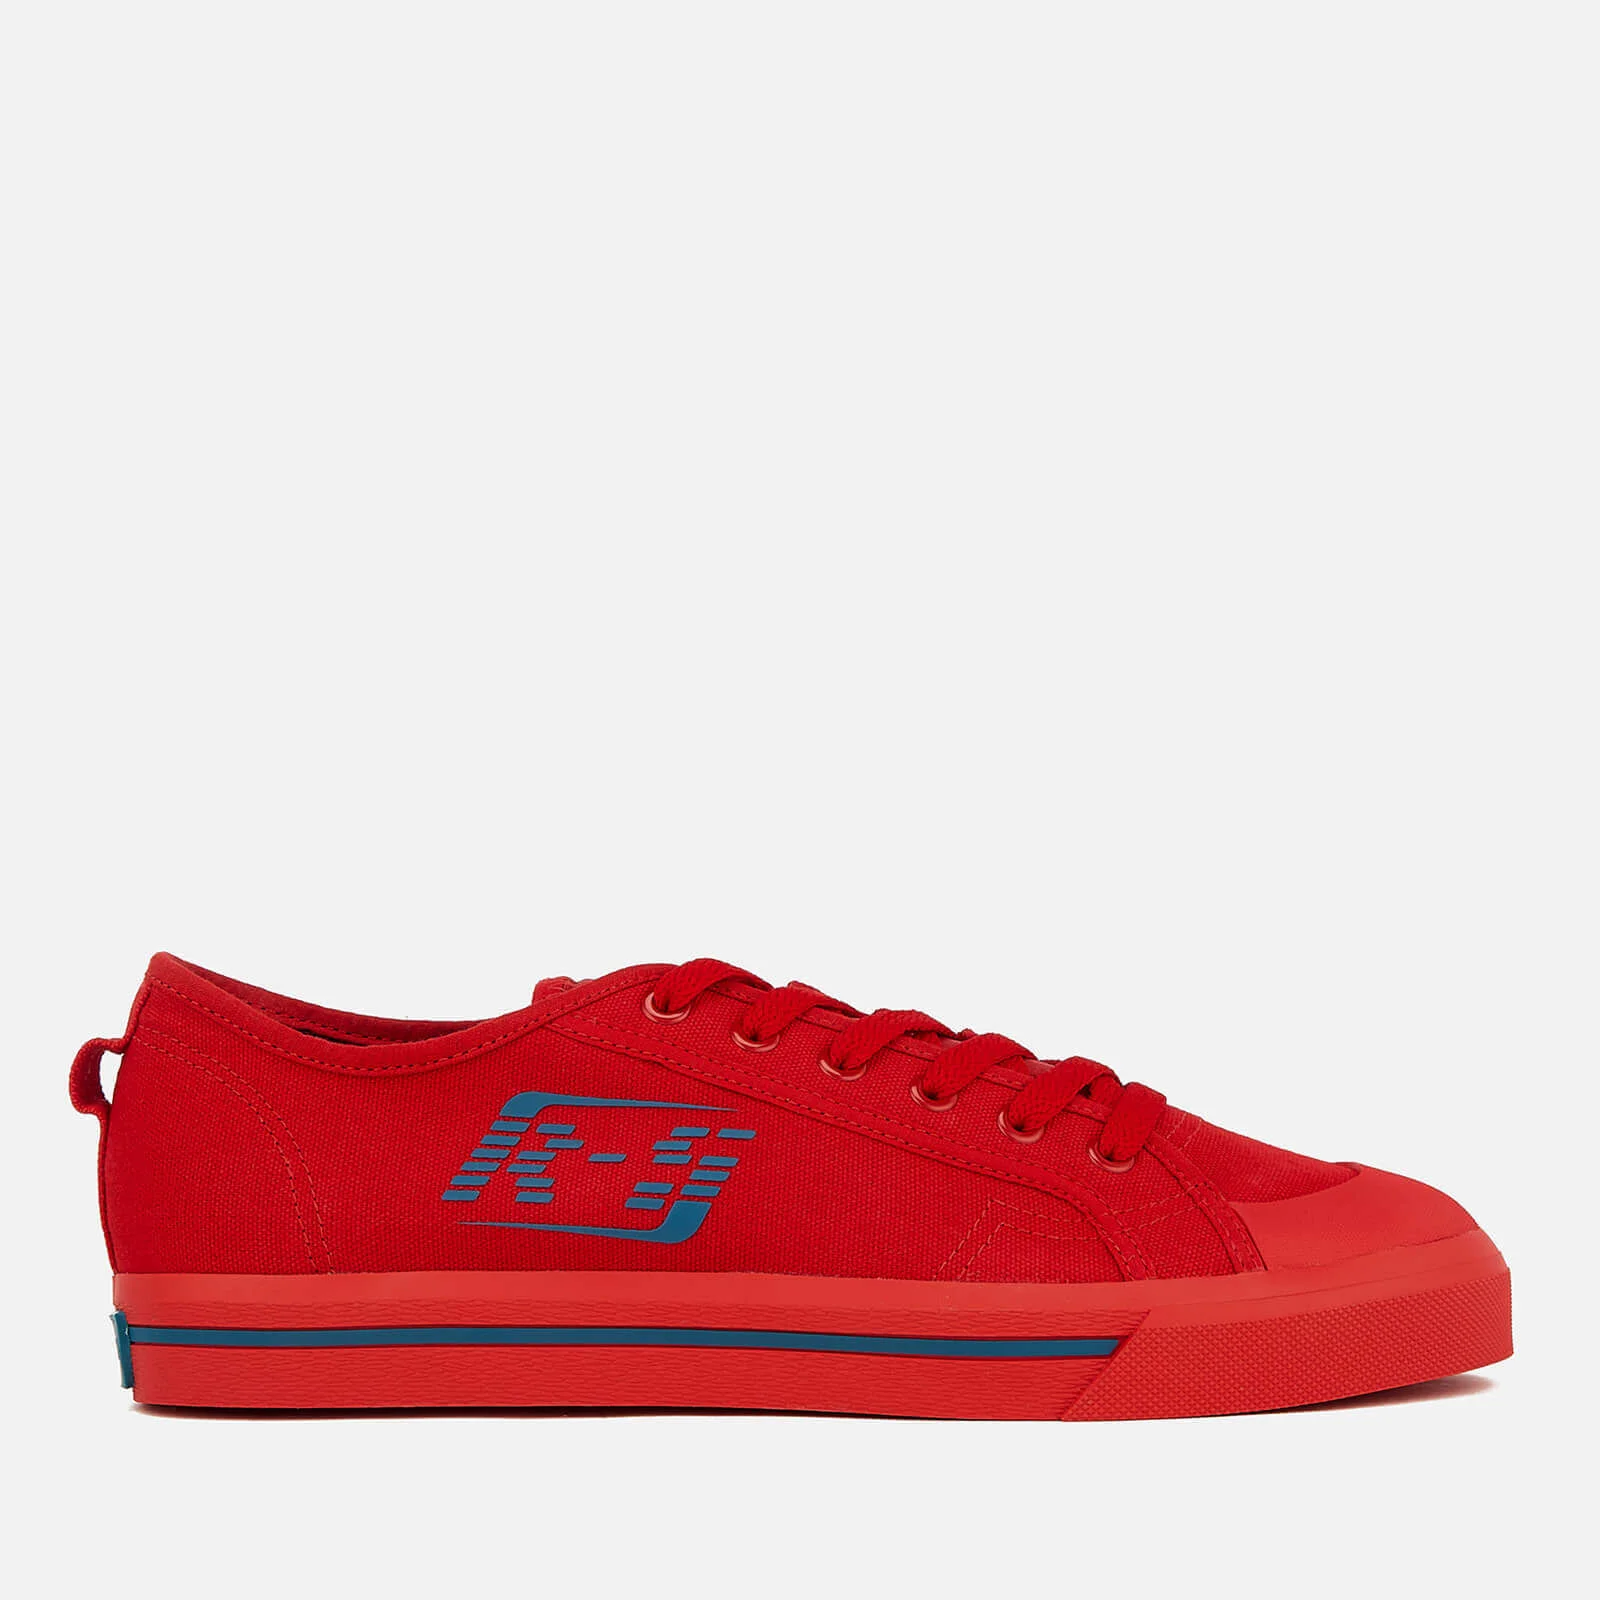 adidas by Raf Simons Men's Spirit Low Trainers - Scarlet/Dust Rust Image 1